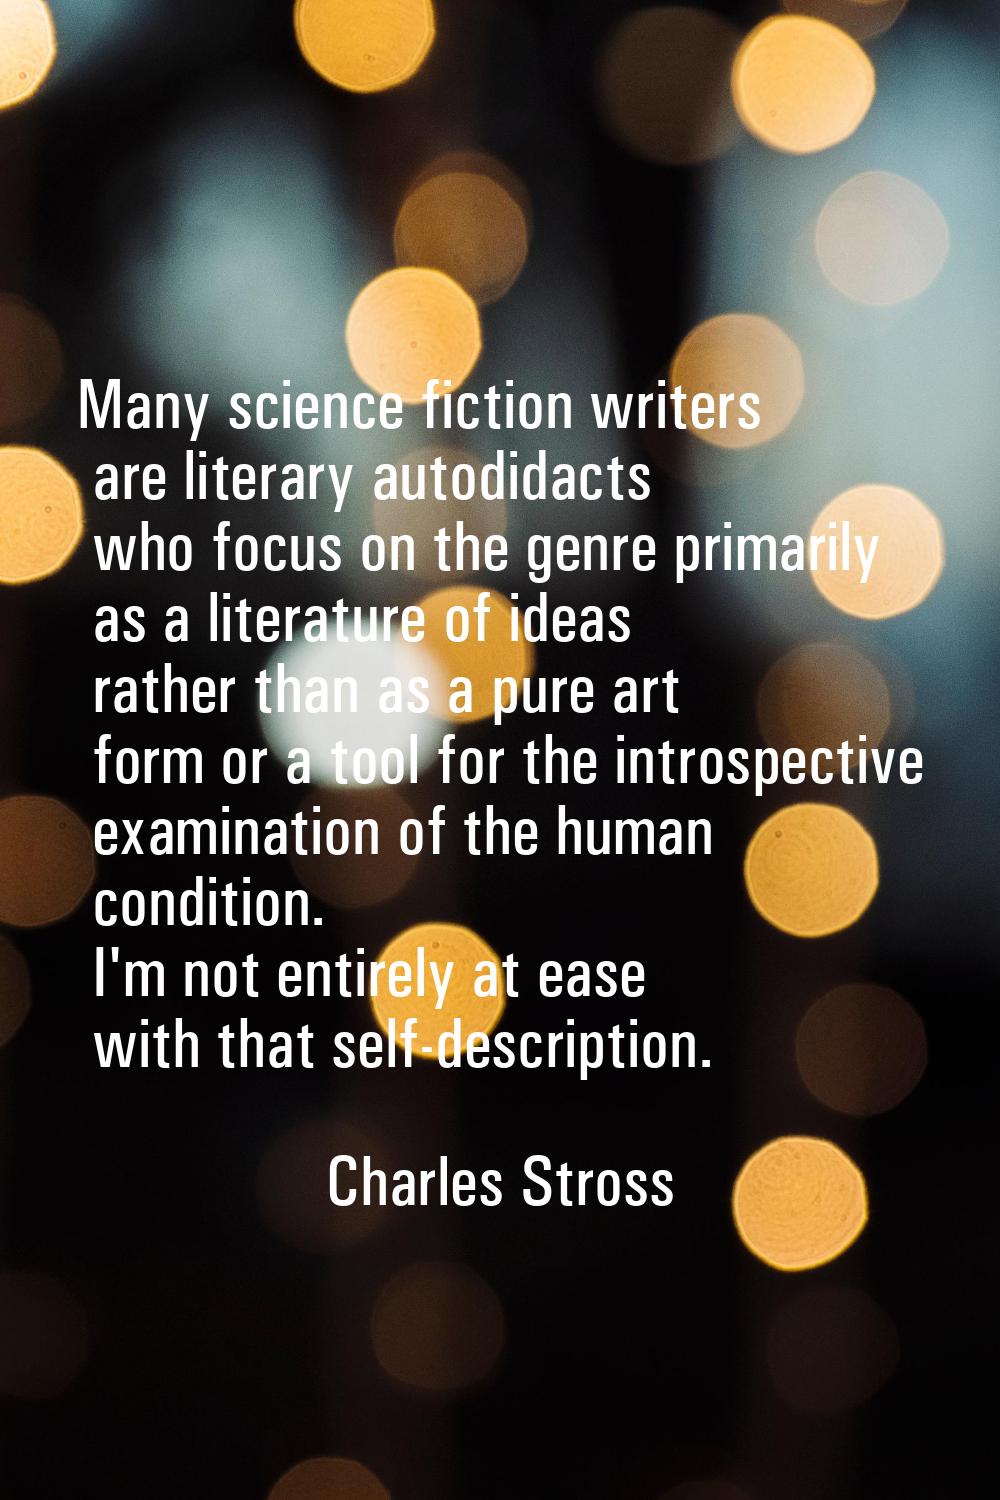 Many science fiction writers are literary autodidacts who focus on the genre primarily as a literat